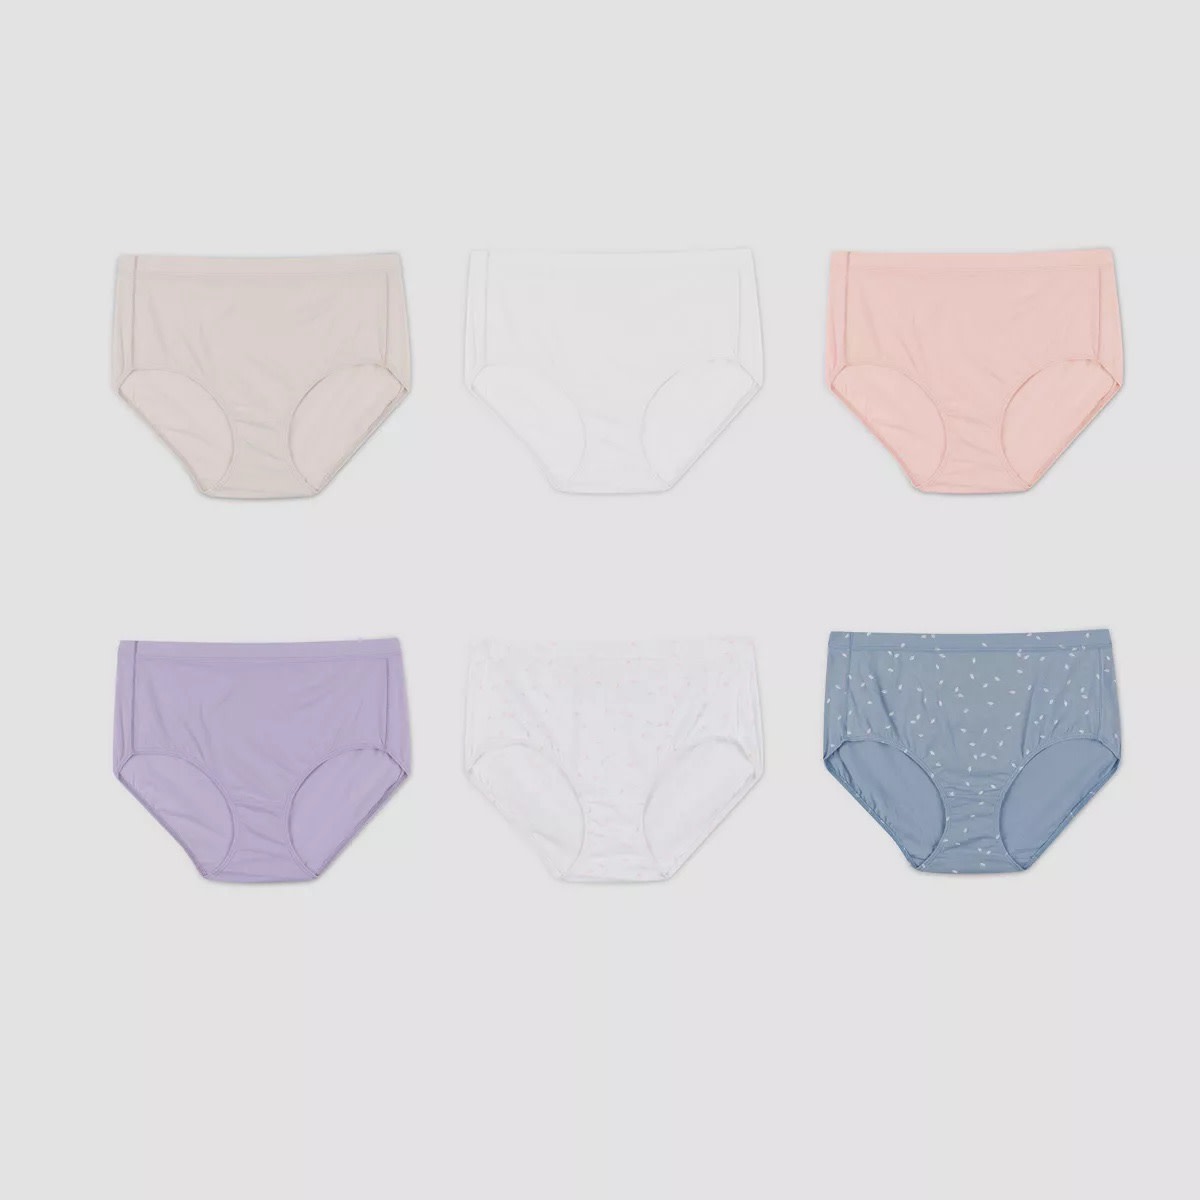 Premium Photo  Comfort with a collection of comfortable cotton panties in  a palette of delicate pastel colors Designed for a seamless fit and crafted  from breathable fabric Generated by AI